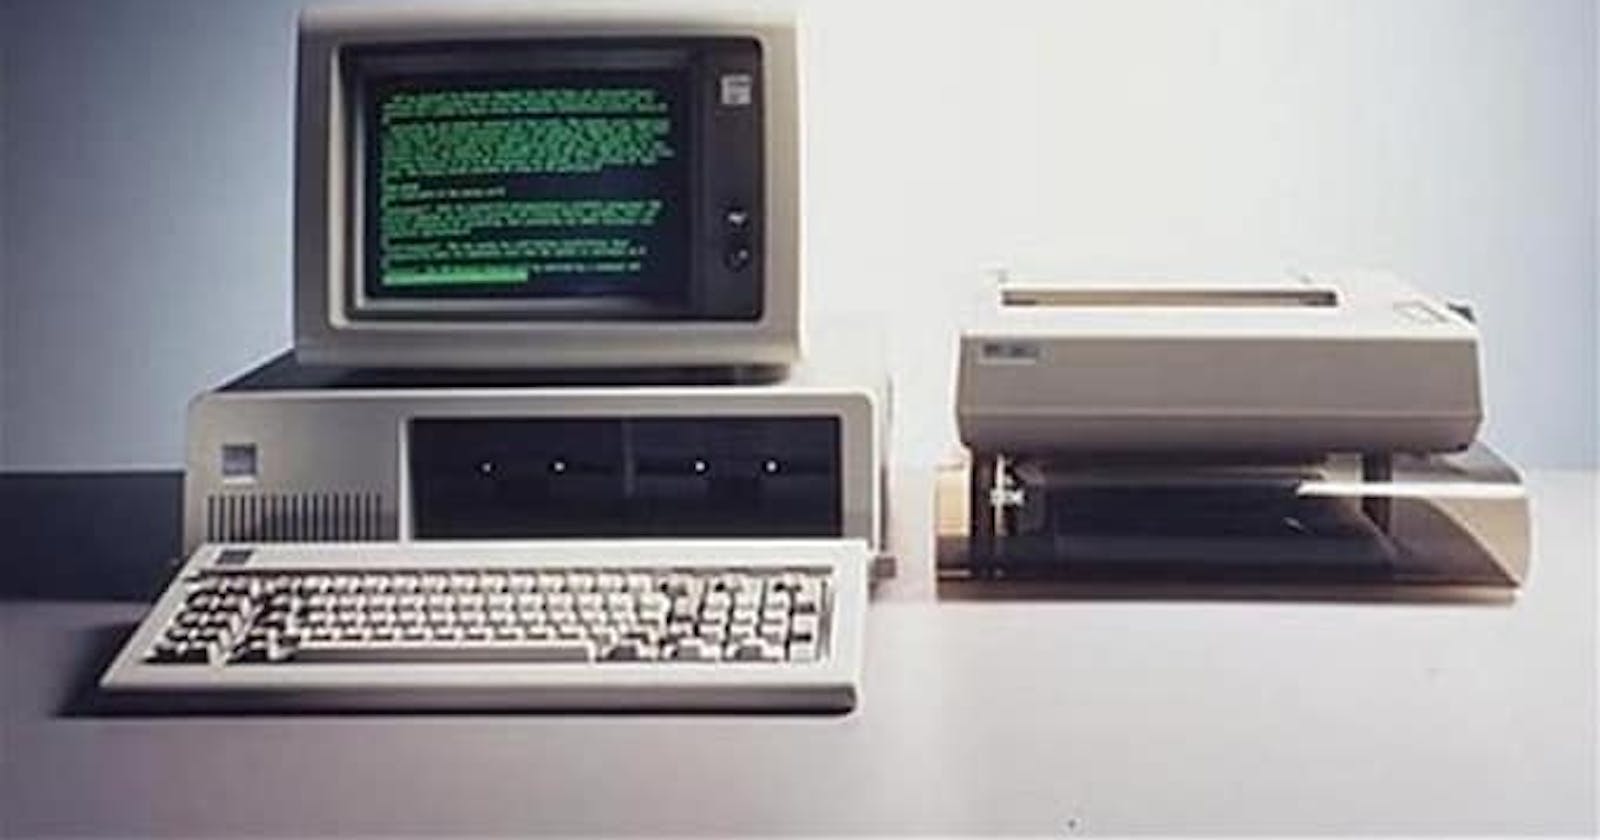 The First Computer I Ever Used And My Experience With It